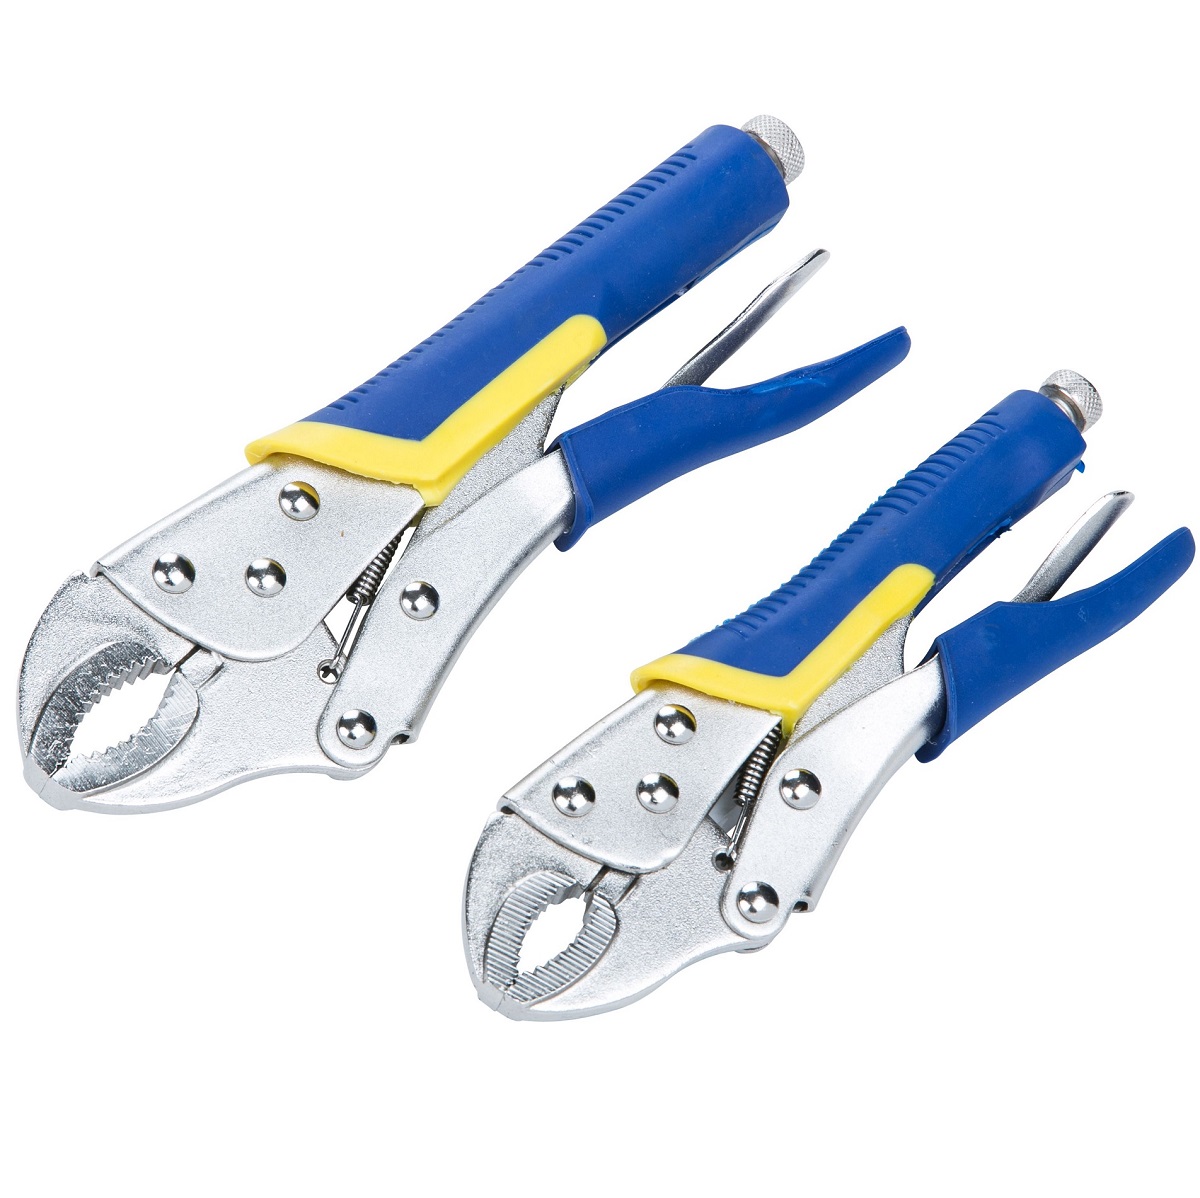 Replacement Jaws (2 Pc) for Pipe Pliers-Round Objects